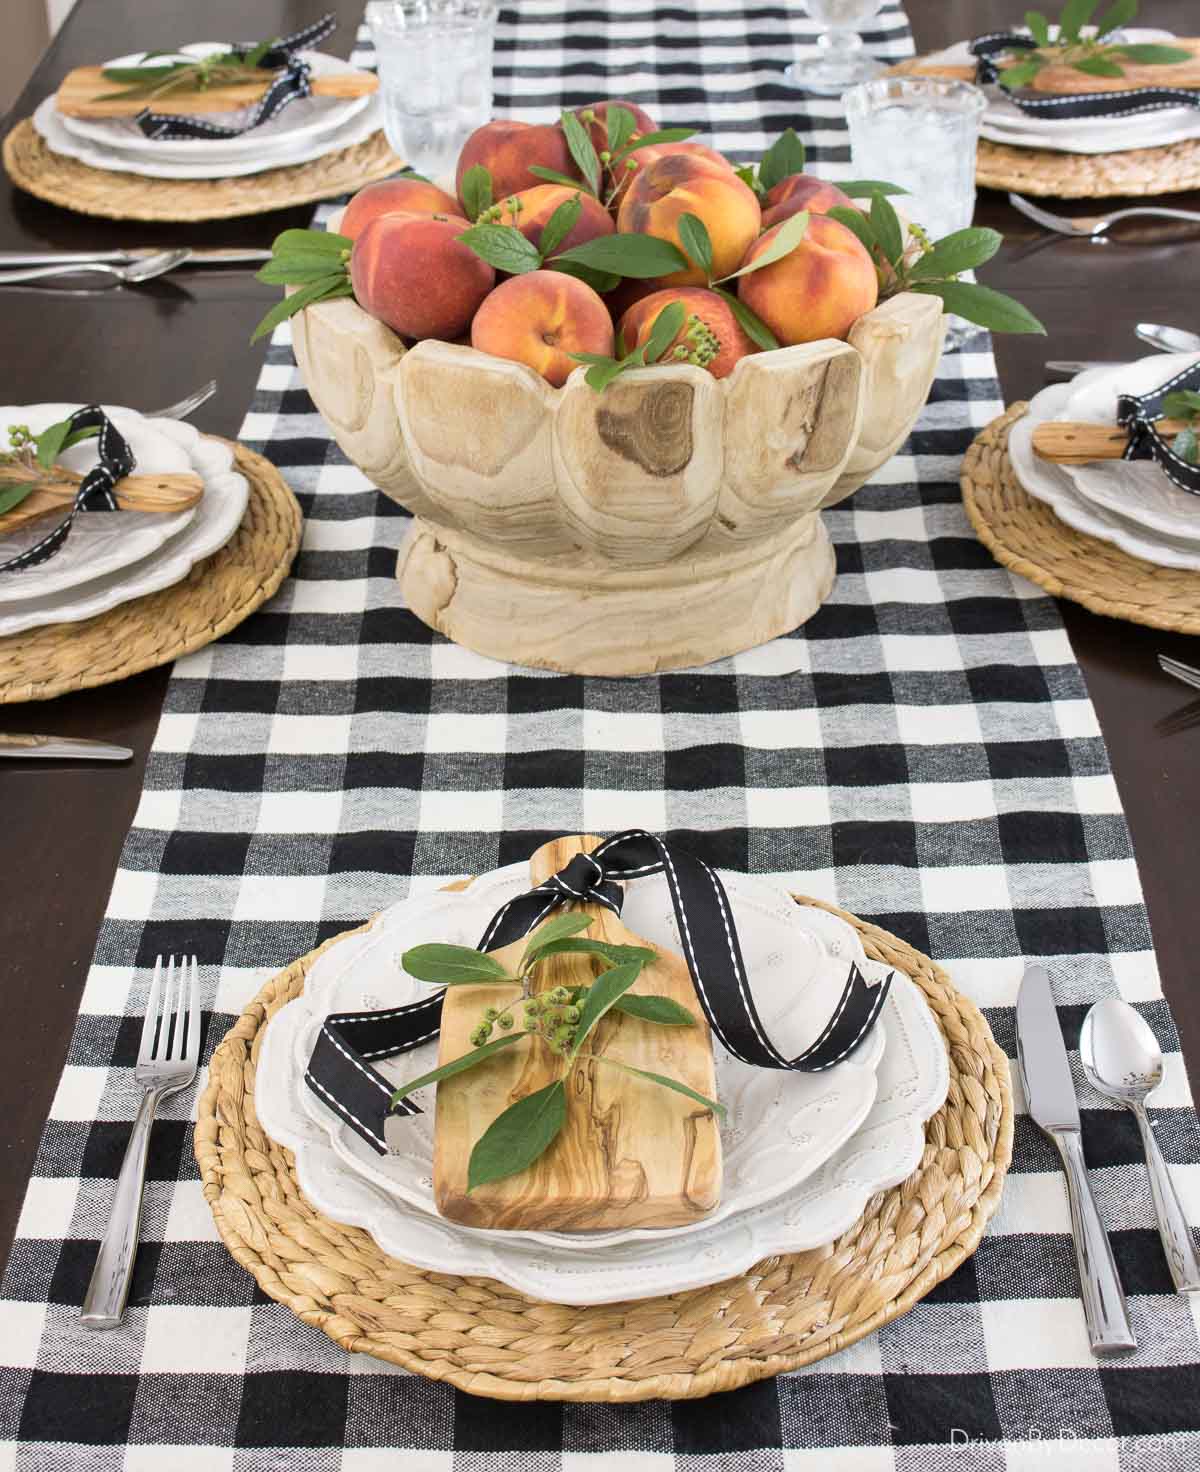 A bowl of peaches makes a beautiful, simple Thanksgiving table centerpiece